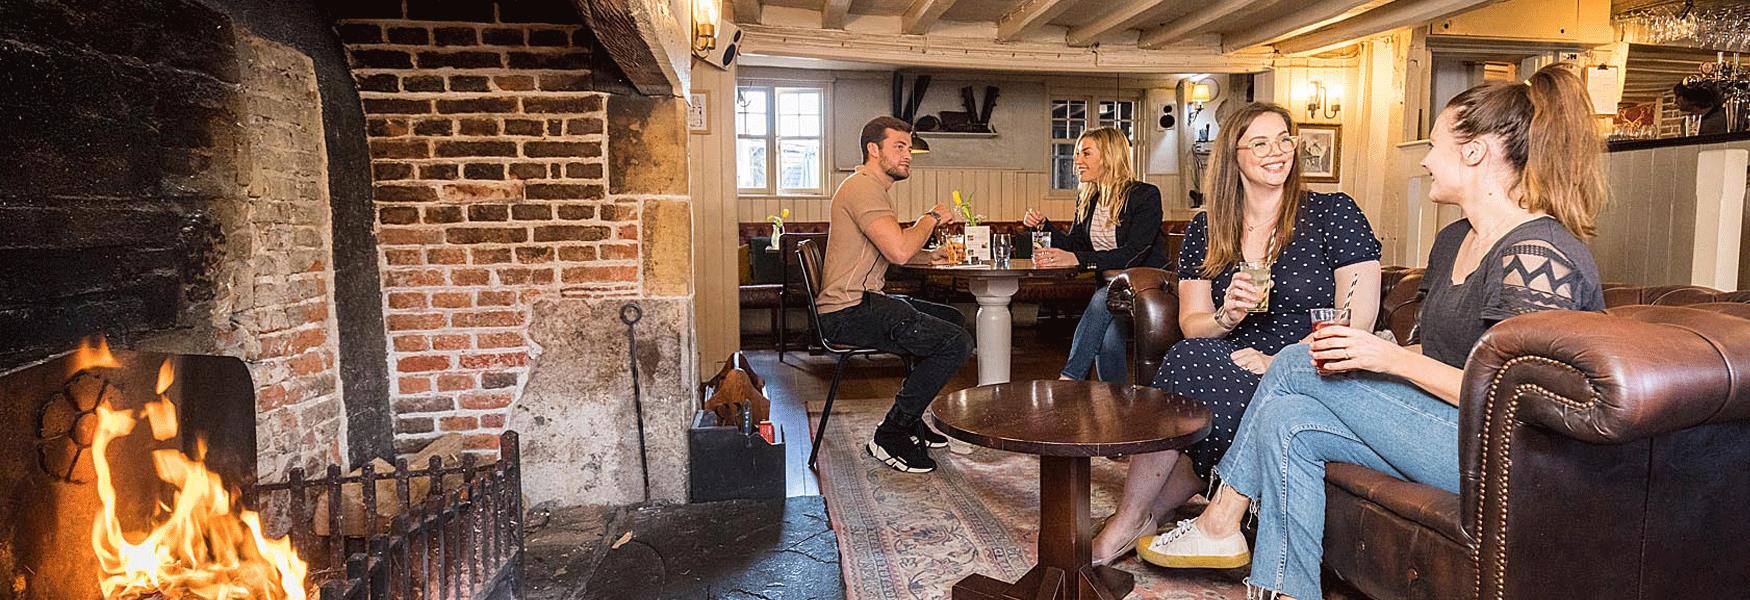 The Windmill is situated in the pretty village of Hollingbourne offering a lovely country pub feel, cosy fire and great food.